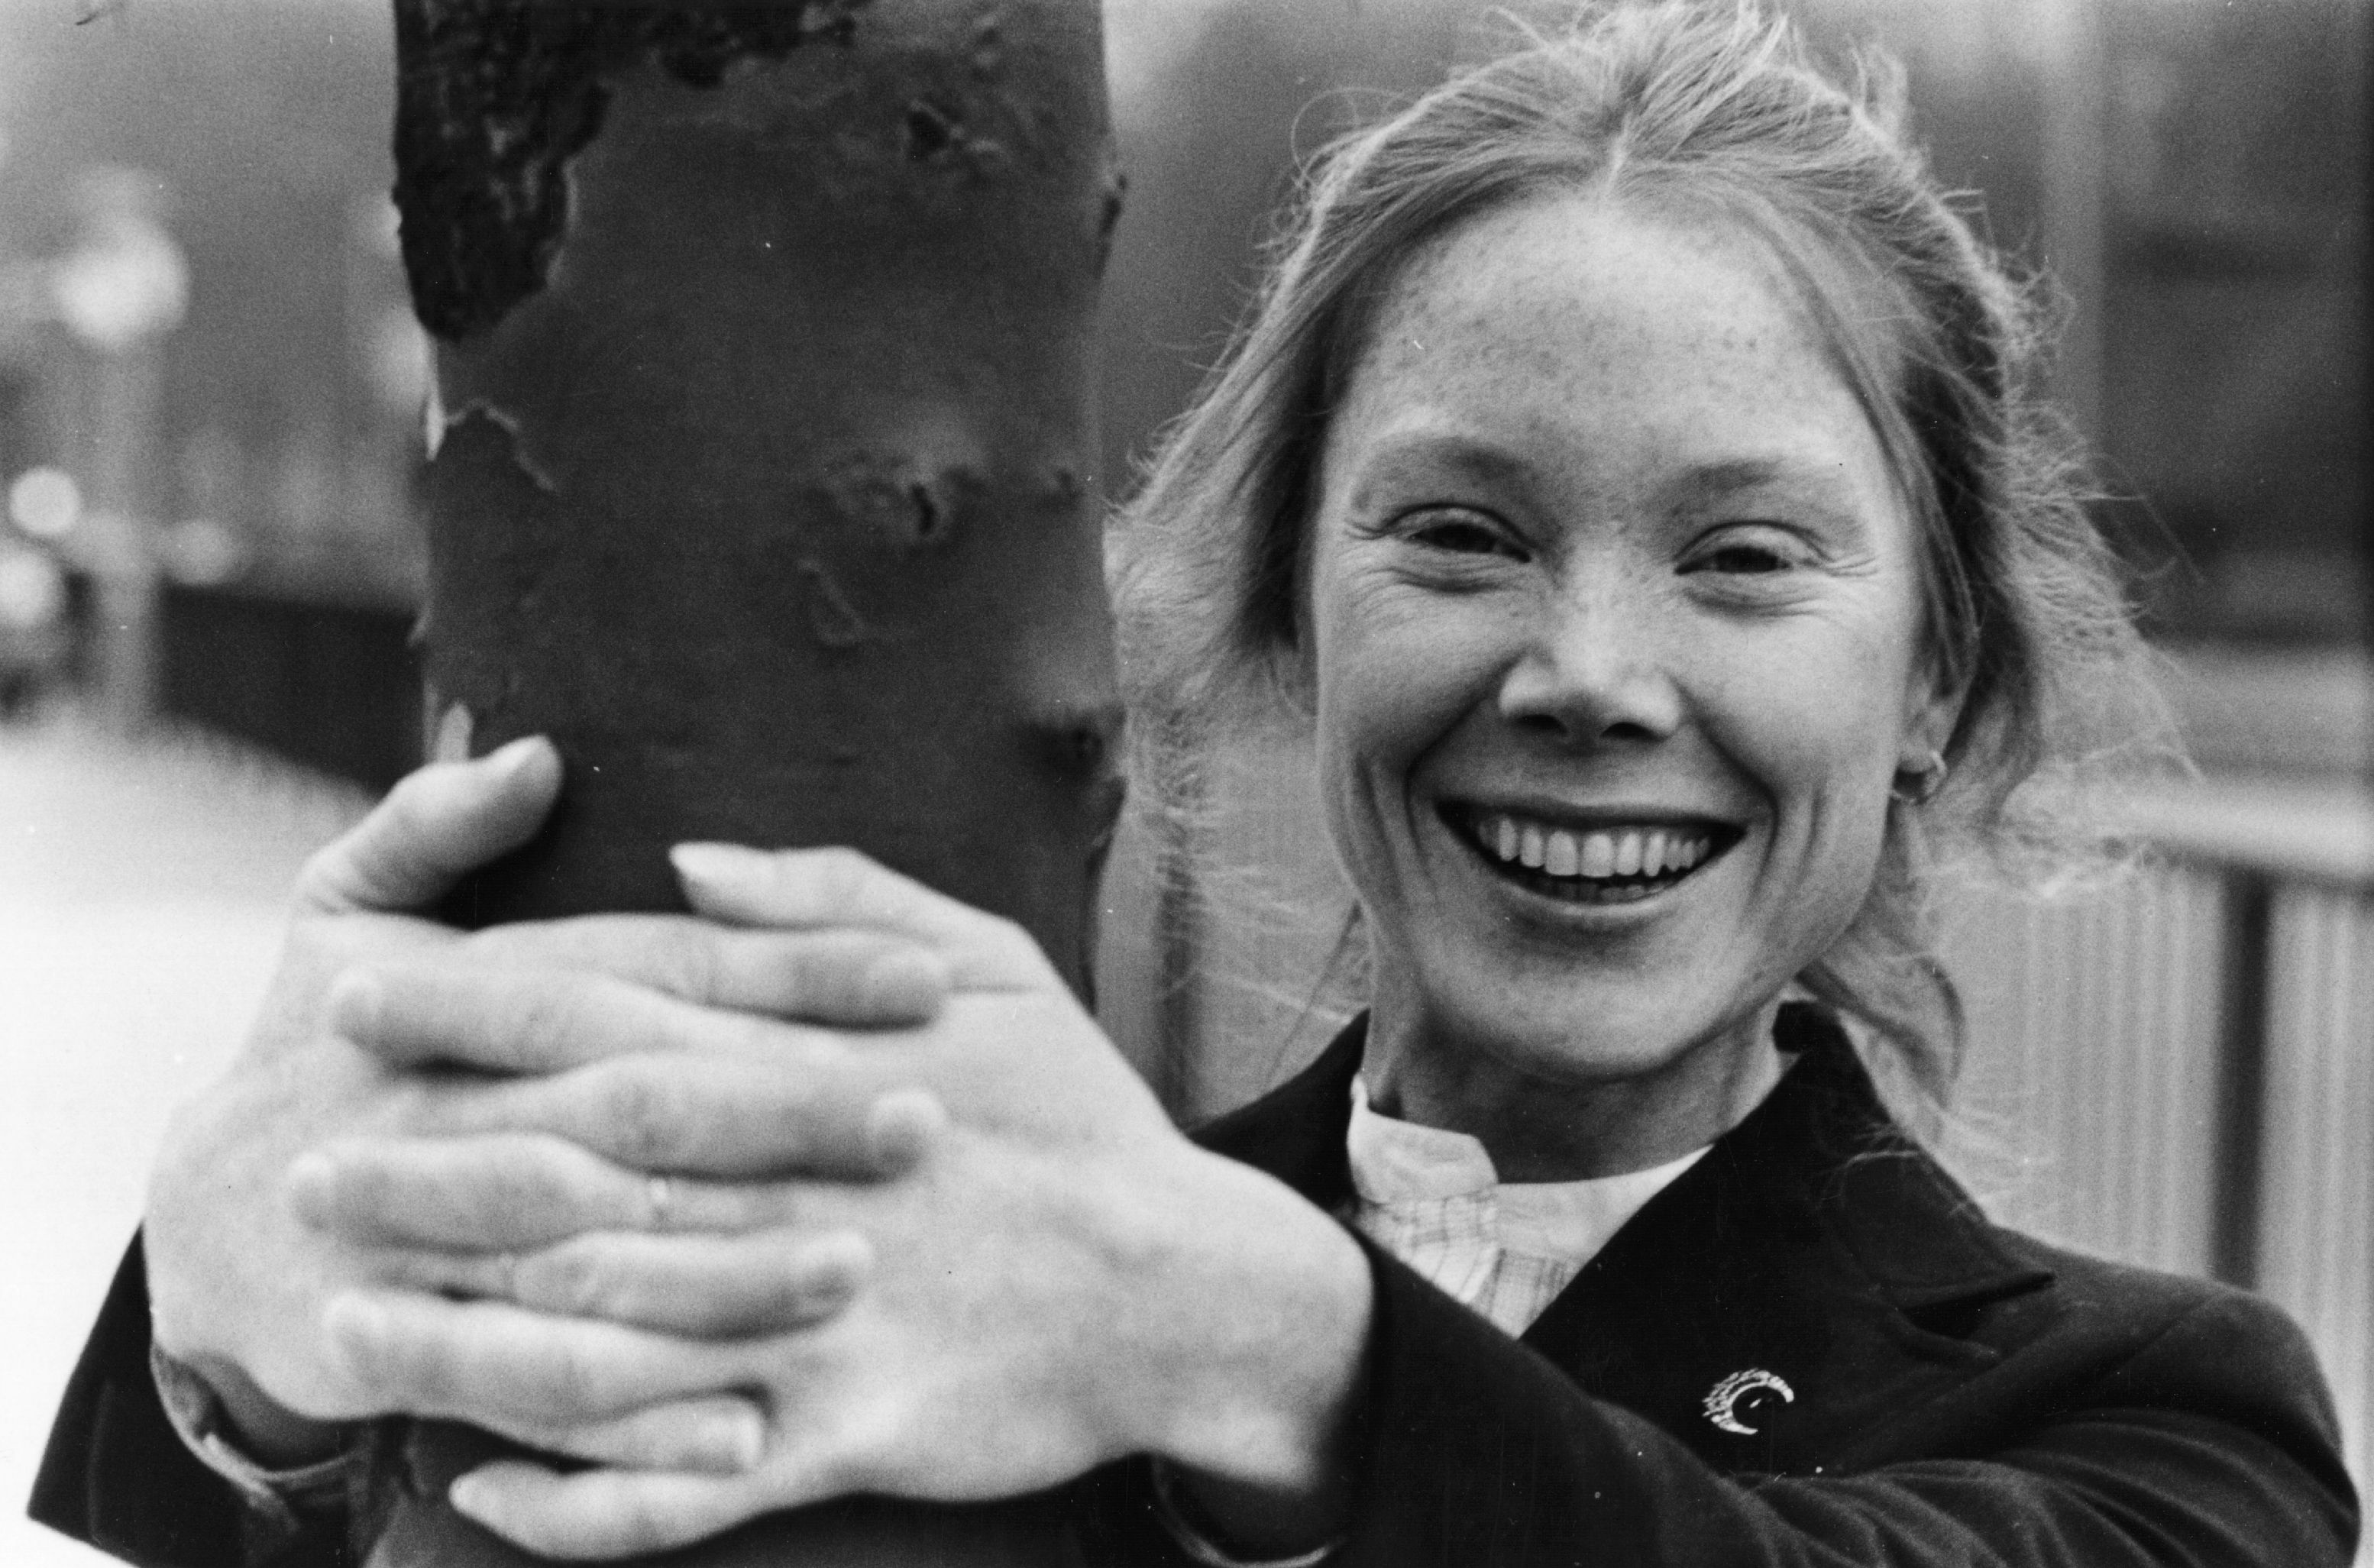 Sissy Spacek smiling while posing in a black and white photo on September 11, 1977 | Source: Getty Images